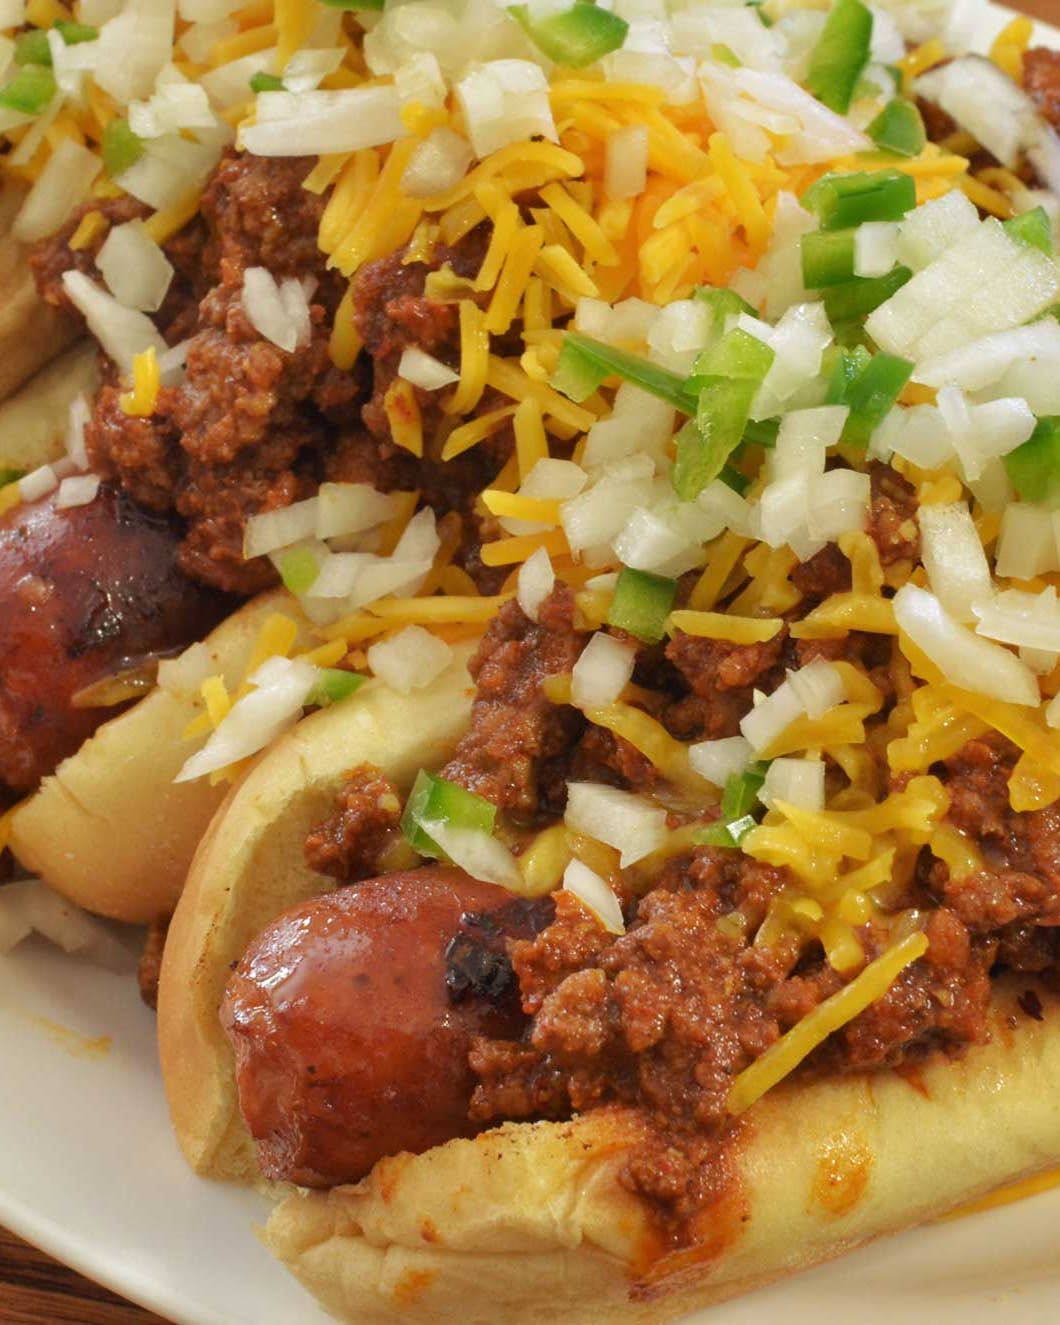 How Mexico and Macedonia Built the American Chili Dog